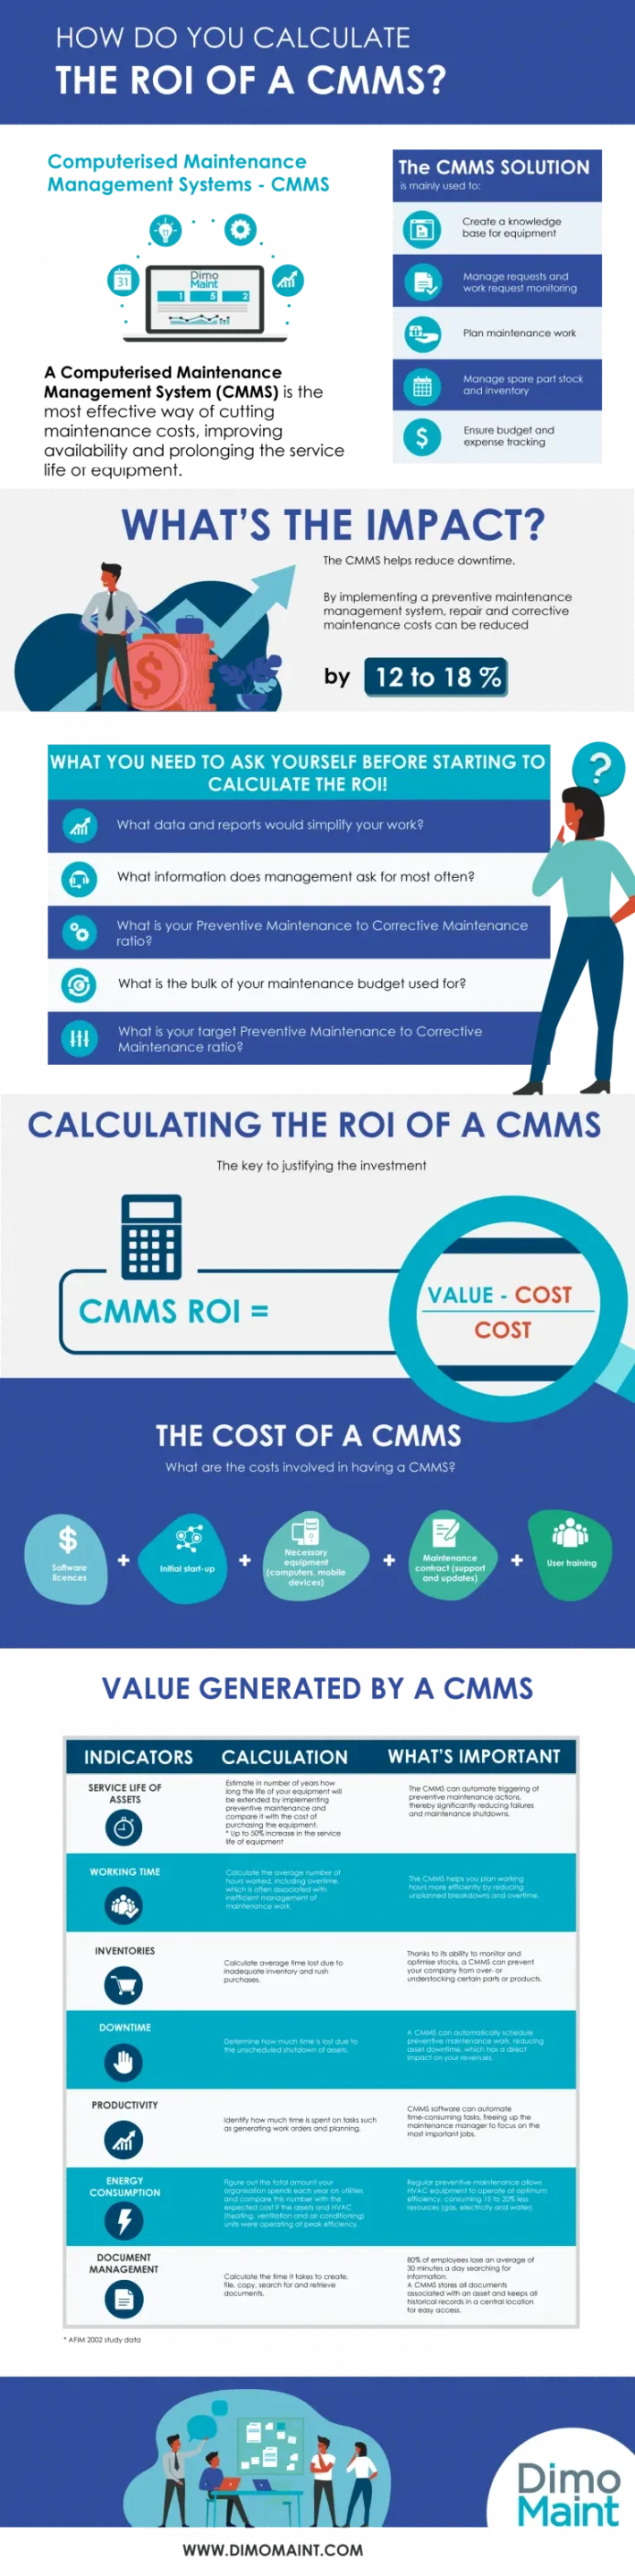 CMMS ROI calculation